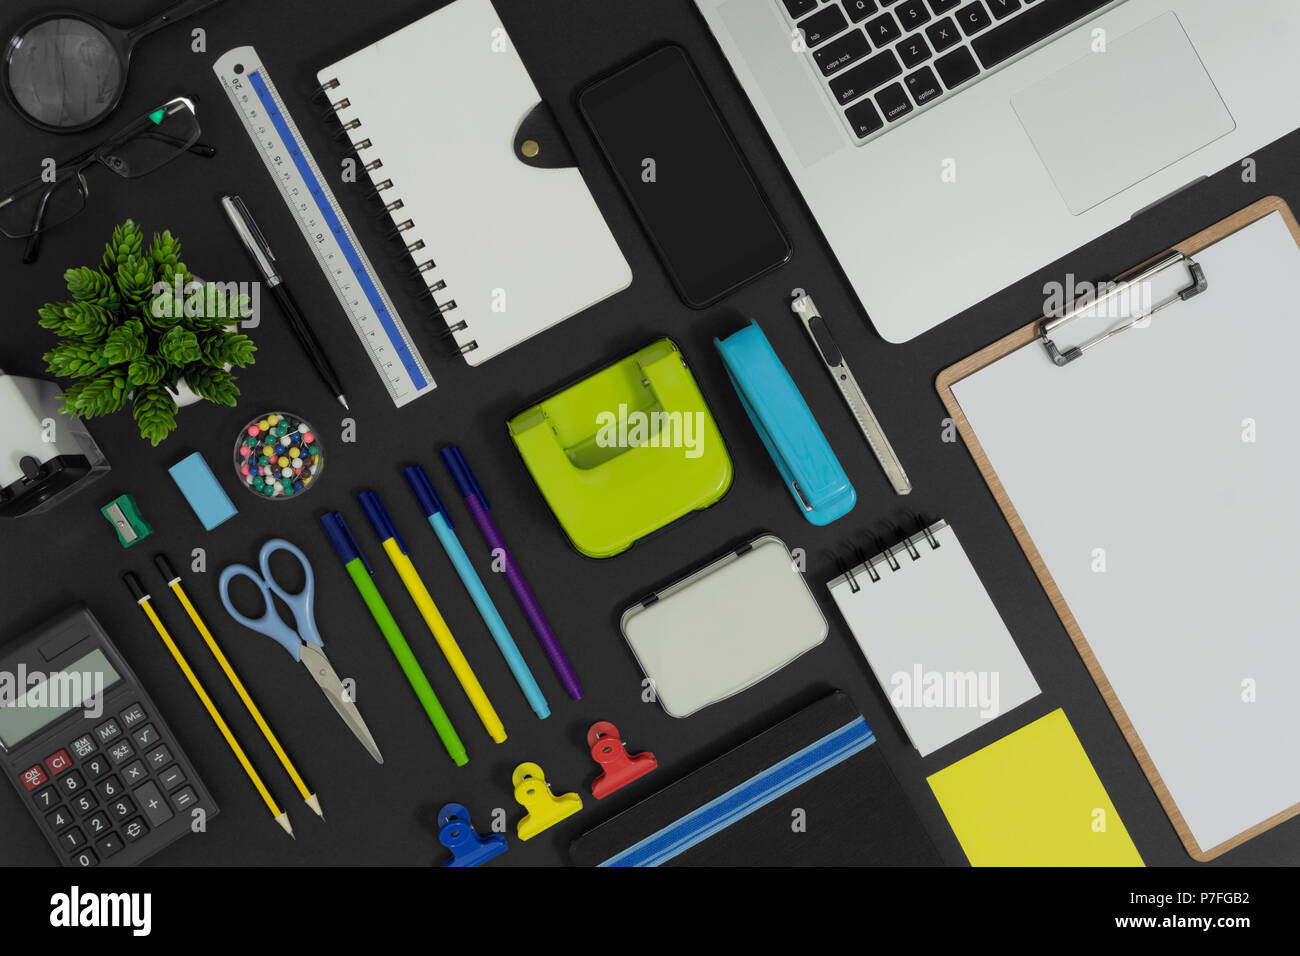 Multiple stationery items and devices for office and school. Top view flat lay of office supply with copy space. Stock Photo